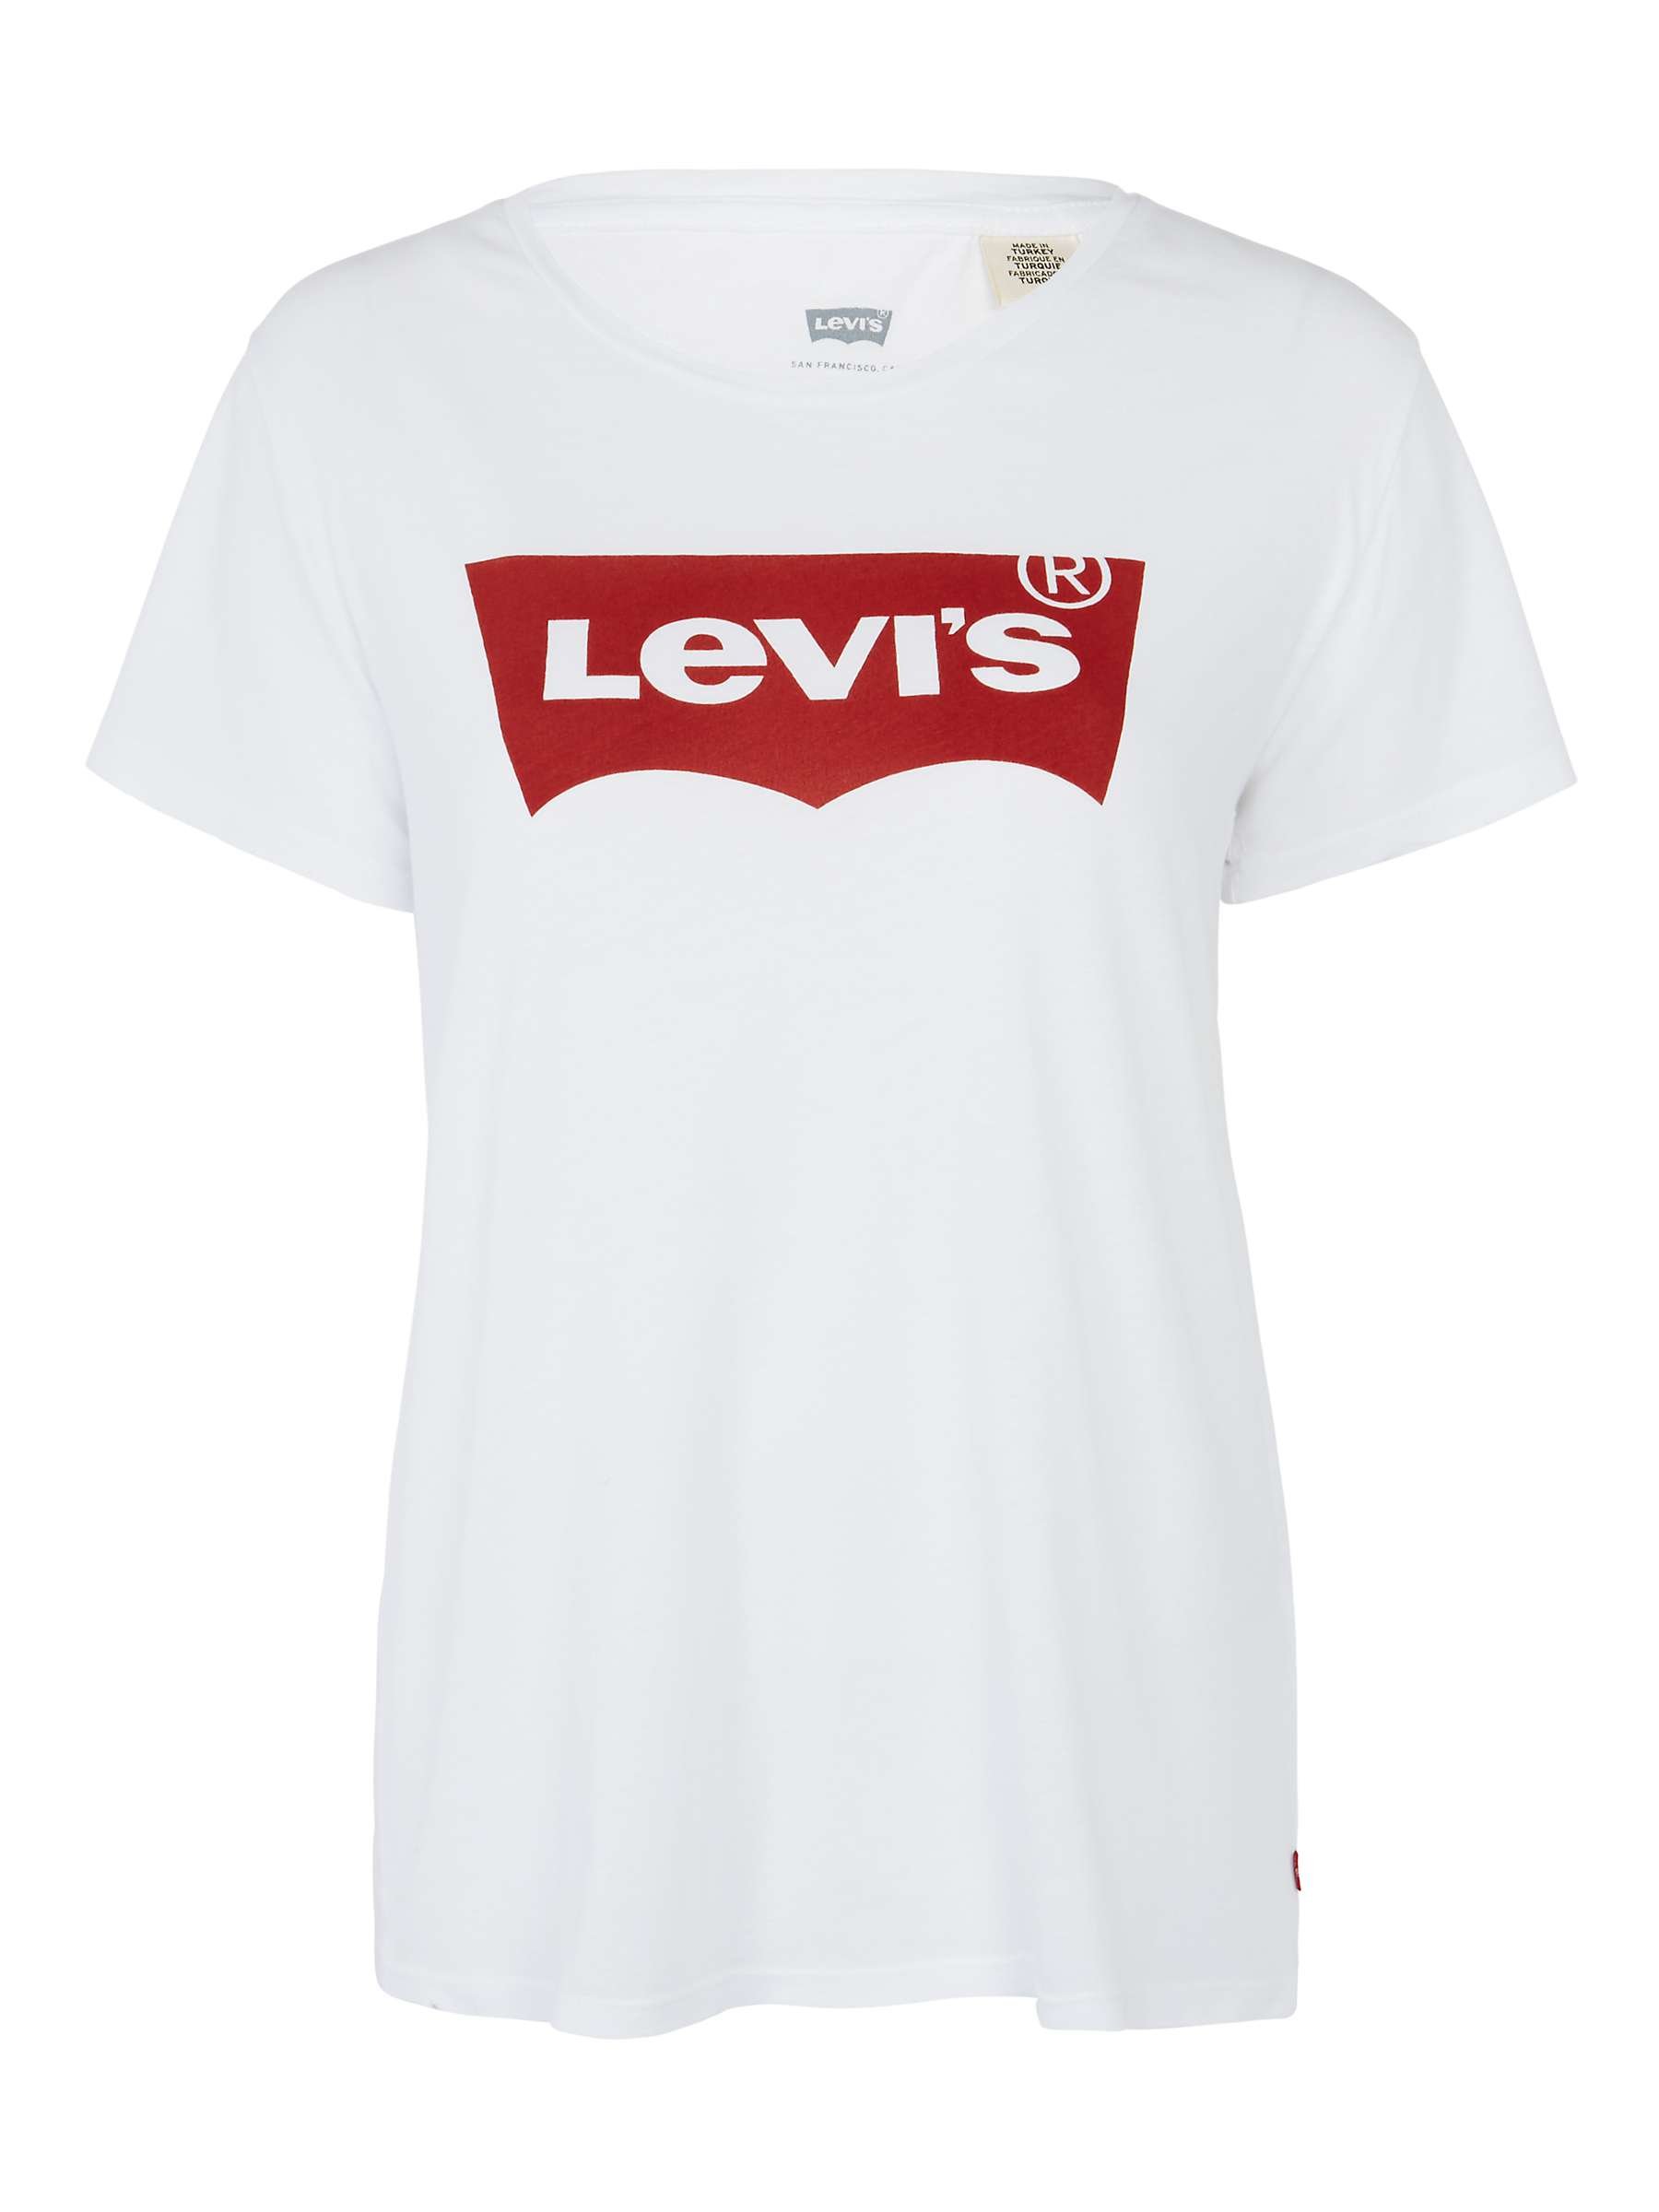 Introducir 46+ imagen levi’s white shirt with red logo